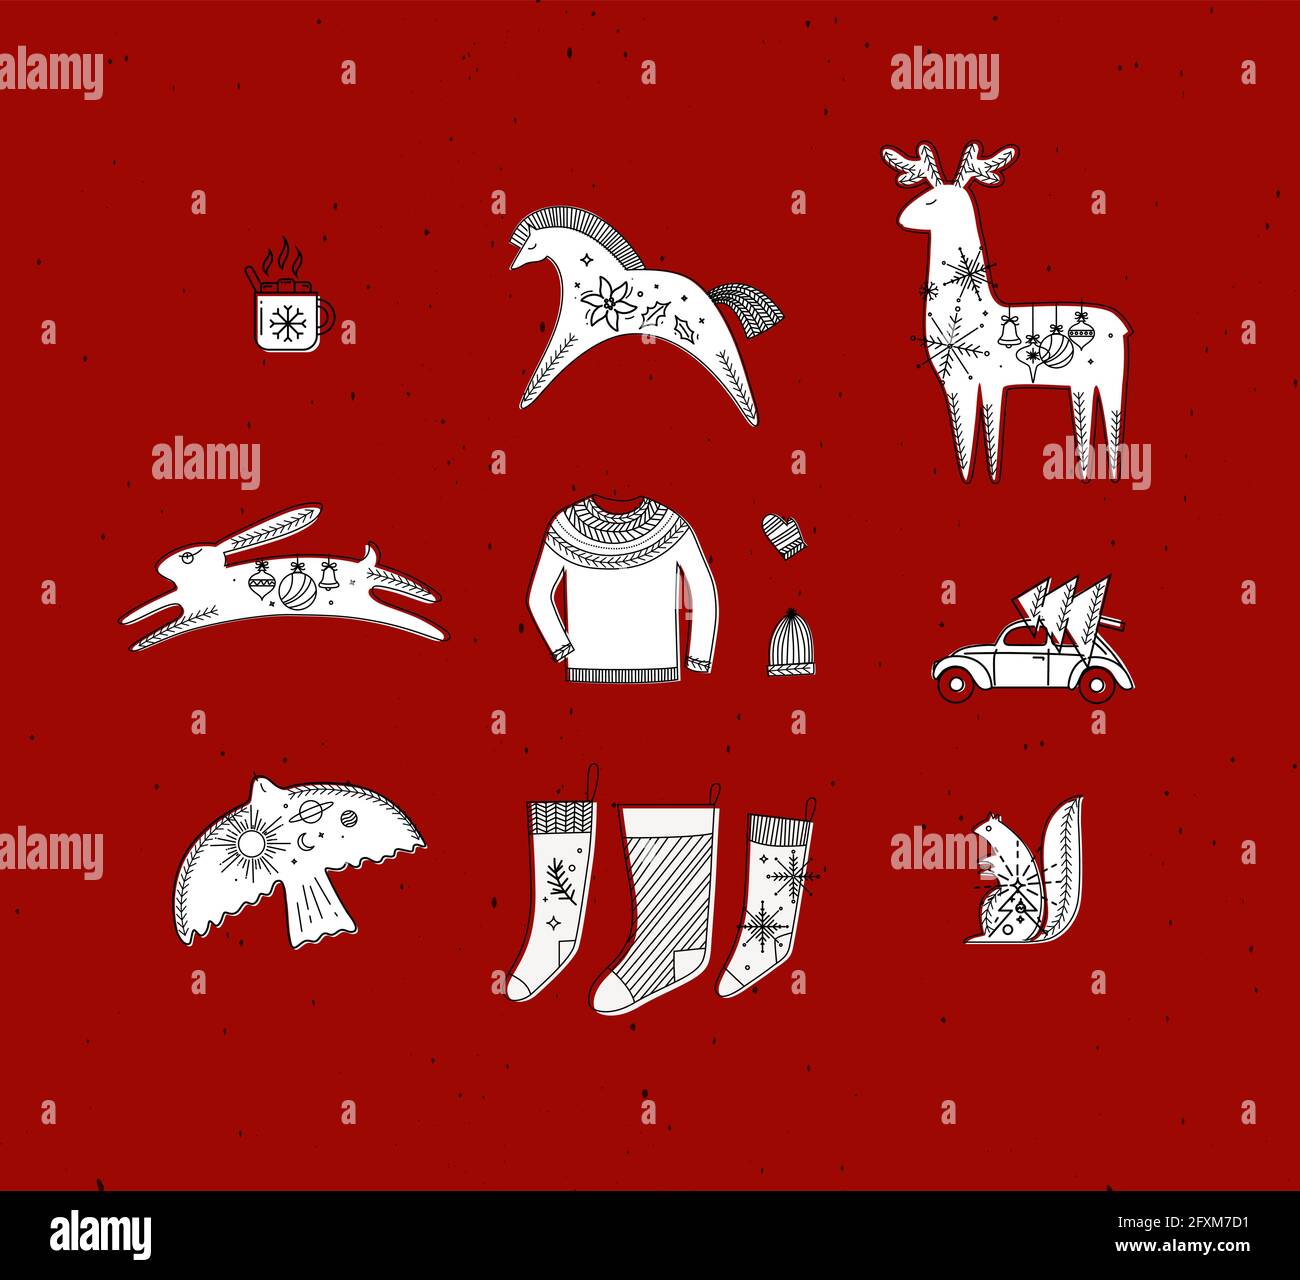 Merry christmas symbols cup, horse, deer, rabbit, hat, glove, pullover, car, tree, bird, squirrel, socks drawing in graphic style on red background Stock Vector